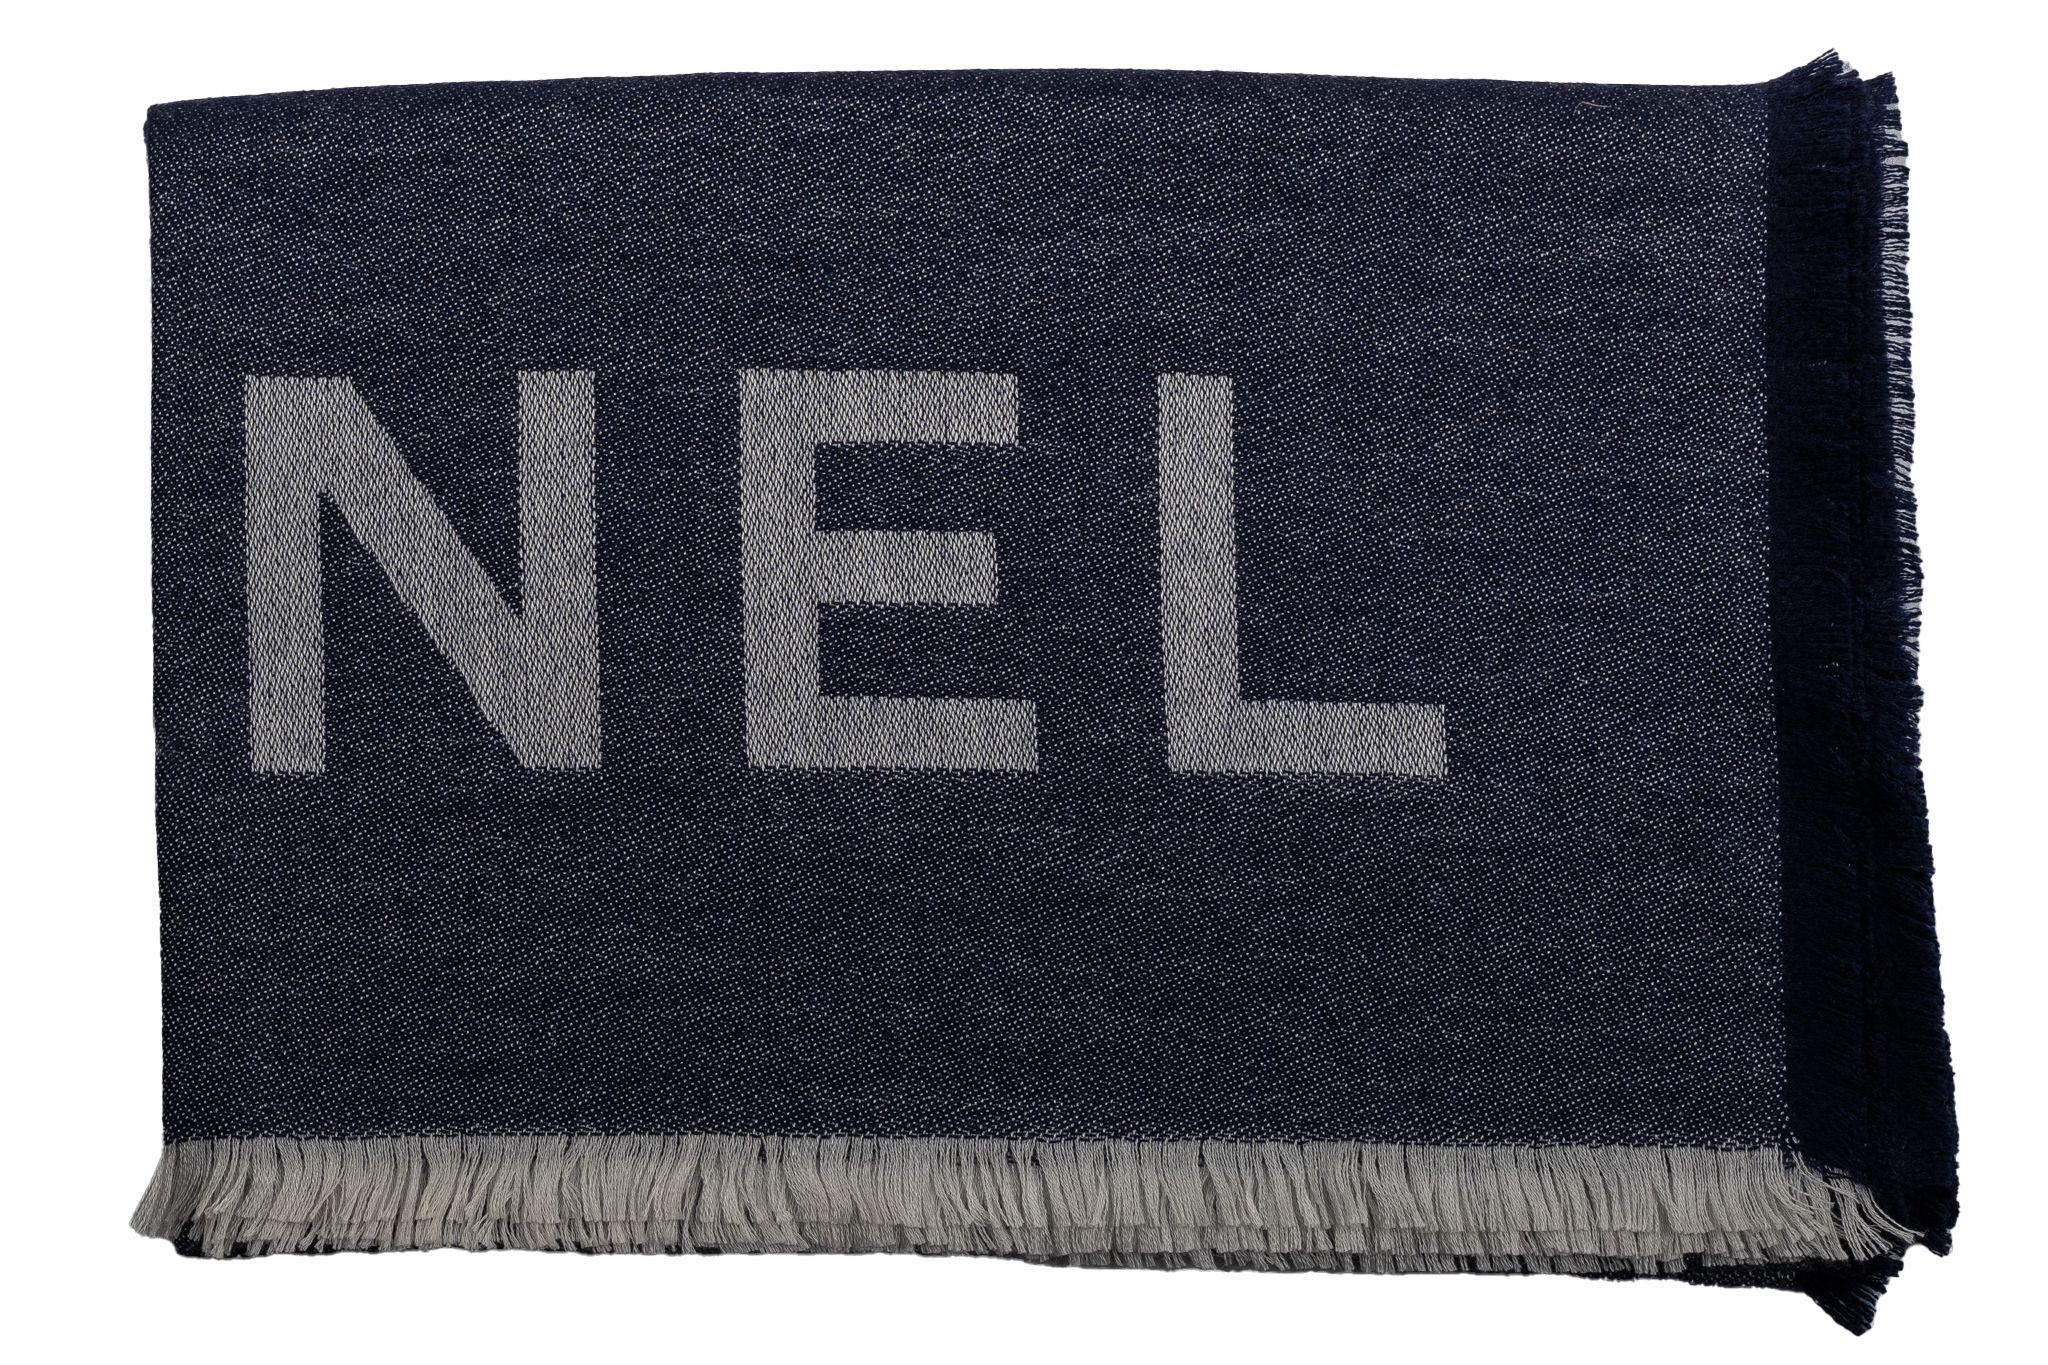 Chanel Cashmere Shawl in navy. The pattern features one big CC logo as the center piece and Chanel is written on it. The item is in new condition.